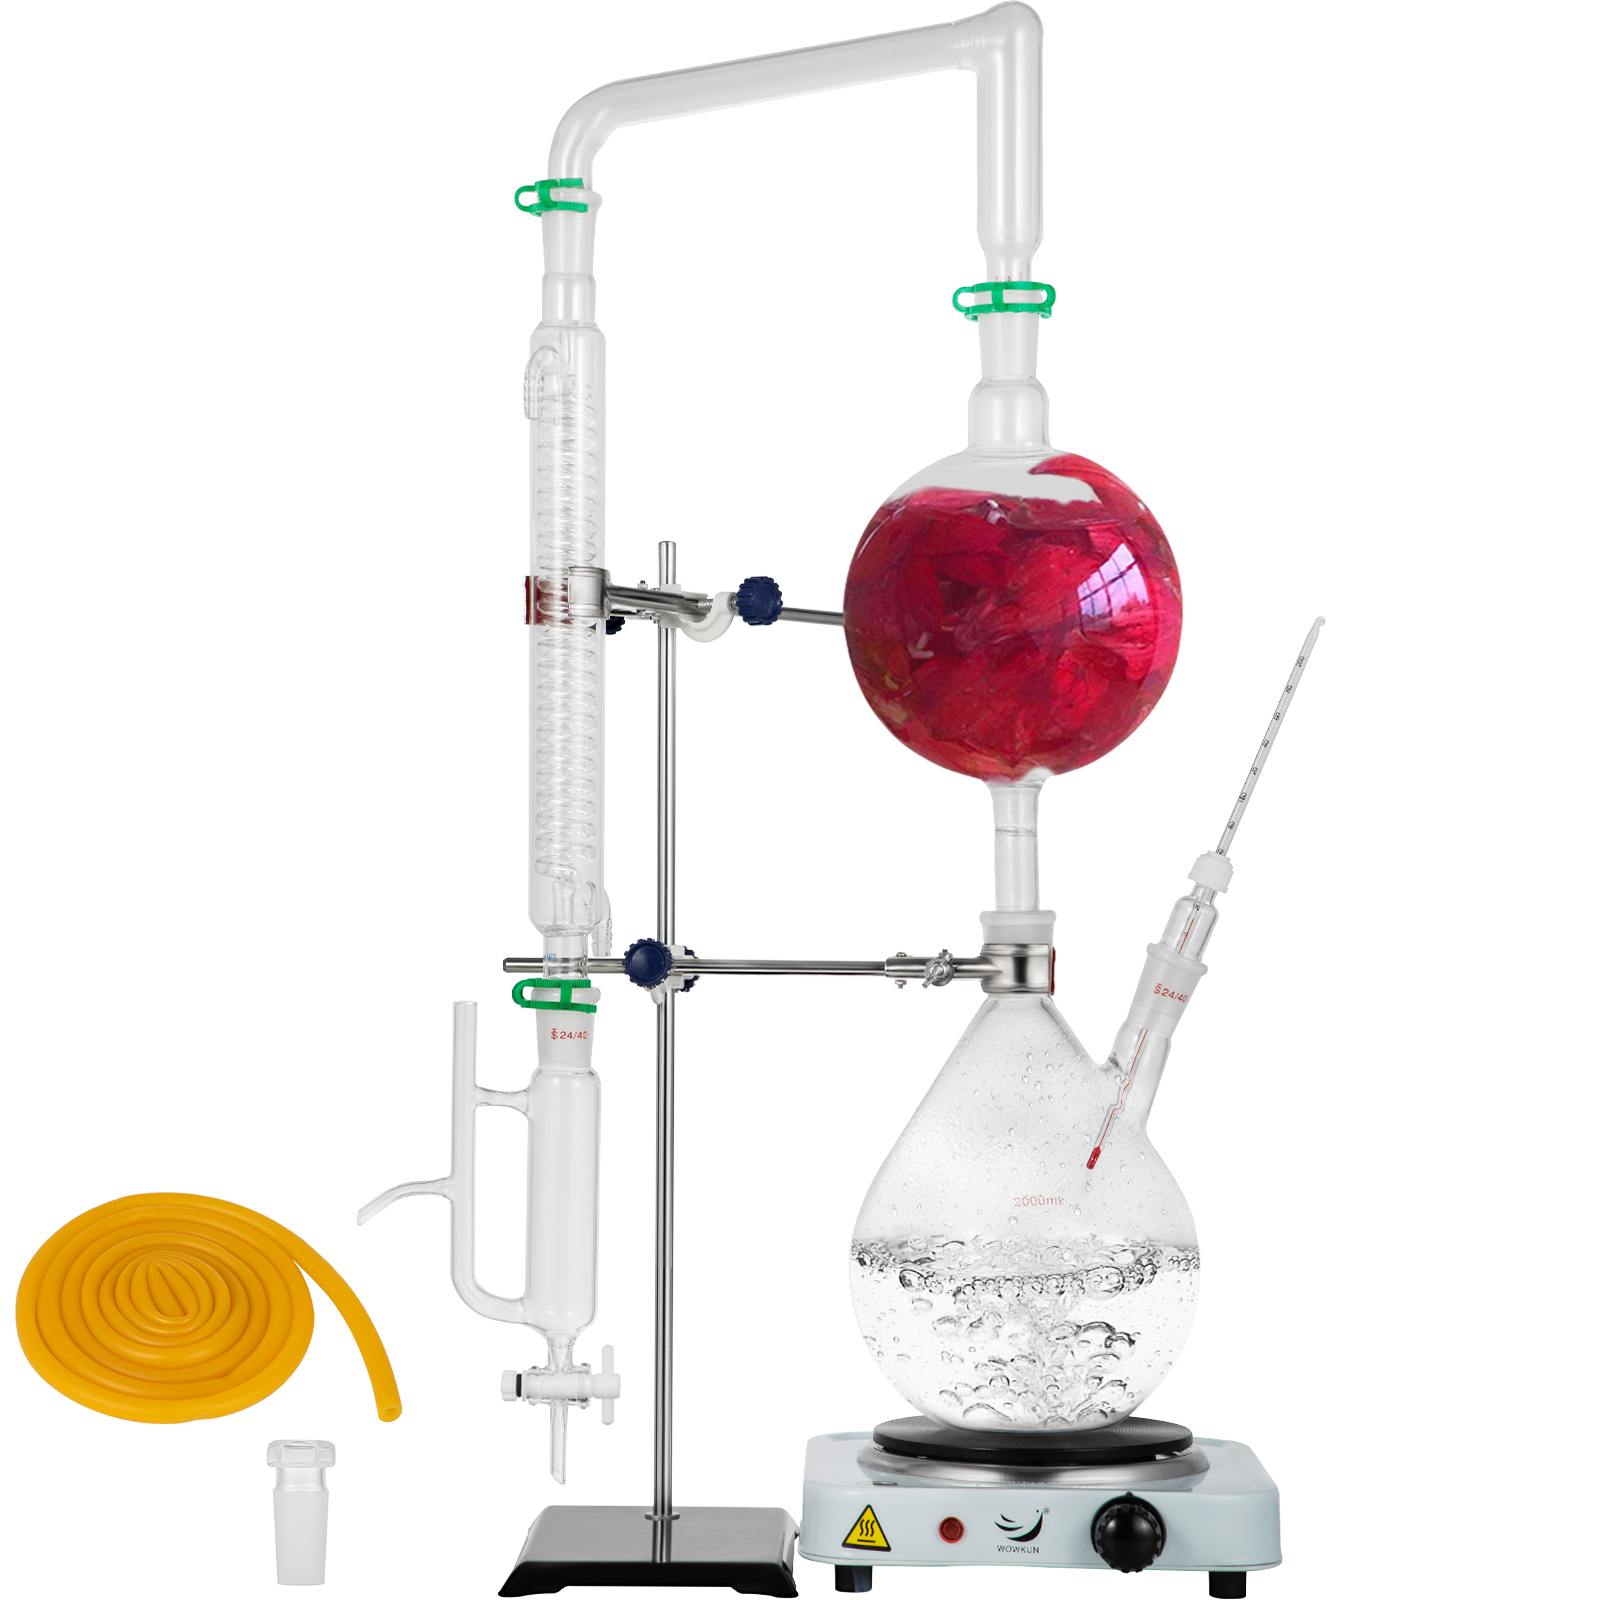 Distillation of Herbs with Steam Current - Oil Extractor Discounted Price